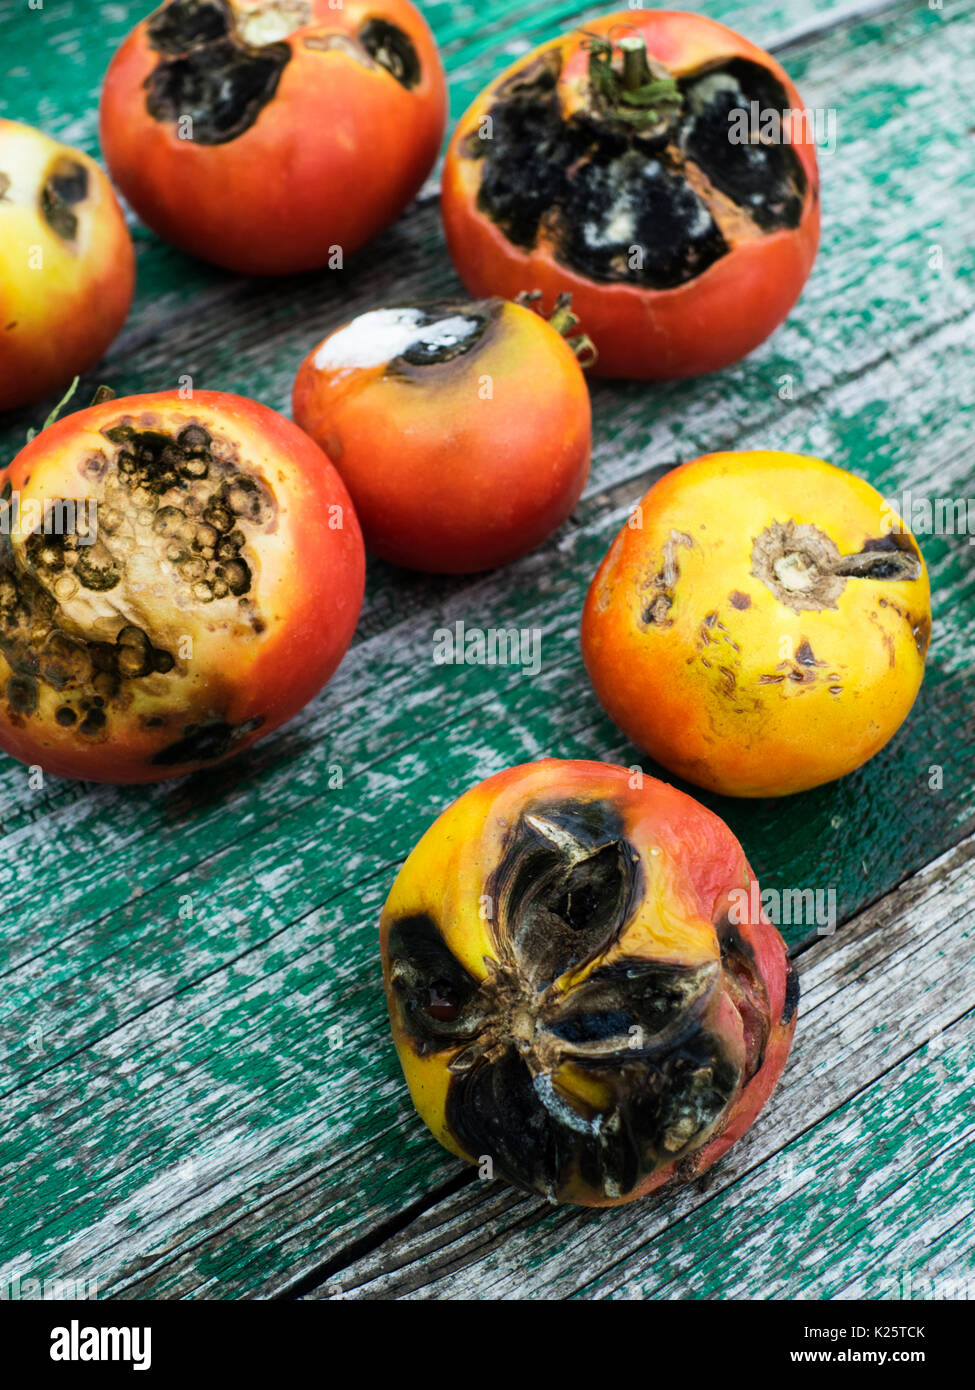 tomatoes, infected with late bloom (Phytophthora Infestans), on a wooden table Stock Photo